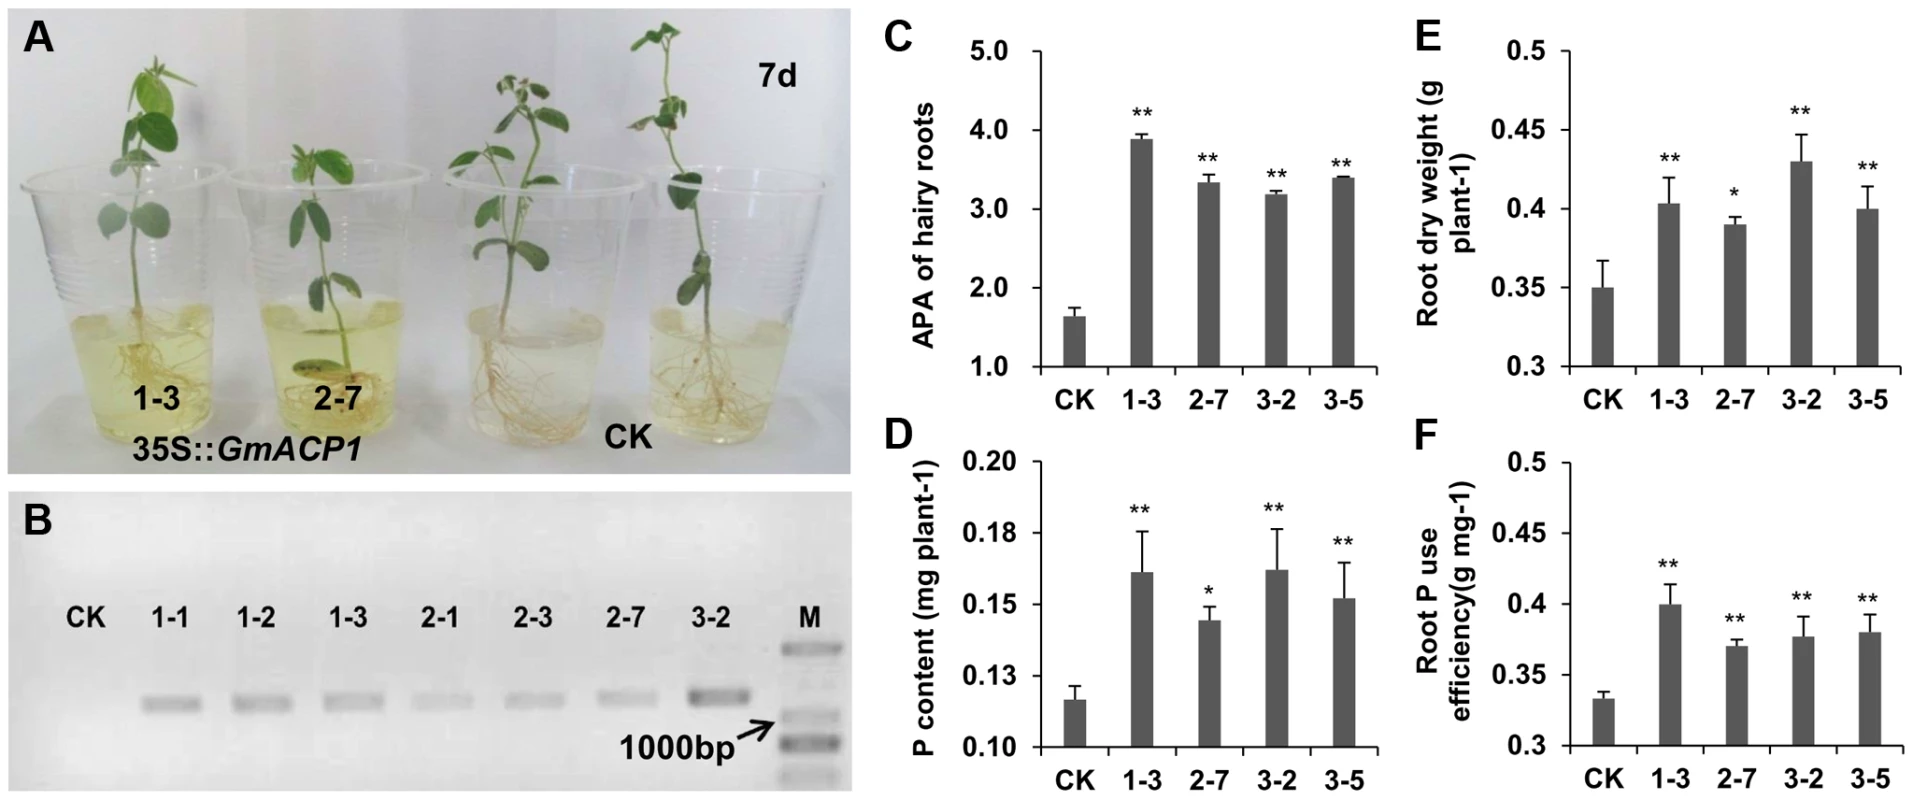 Phenotypes of hairy roots overexpressing <i>GmACP1</i> and control hairy roots (CK) cultured by hydroponics and supplied with 0.5 mM phytate.